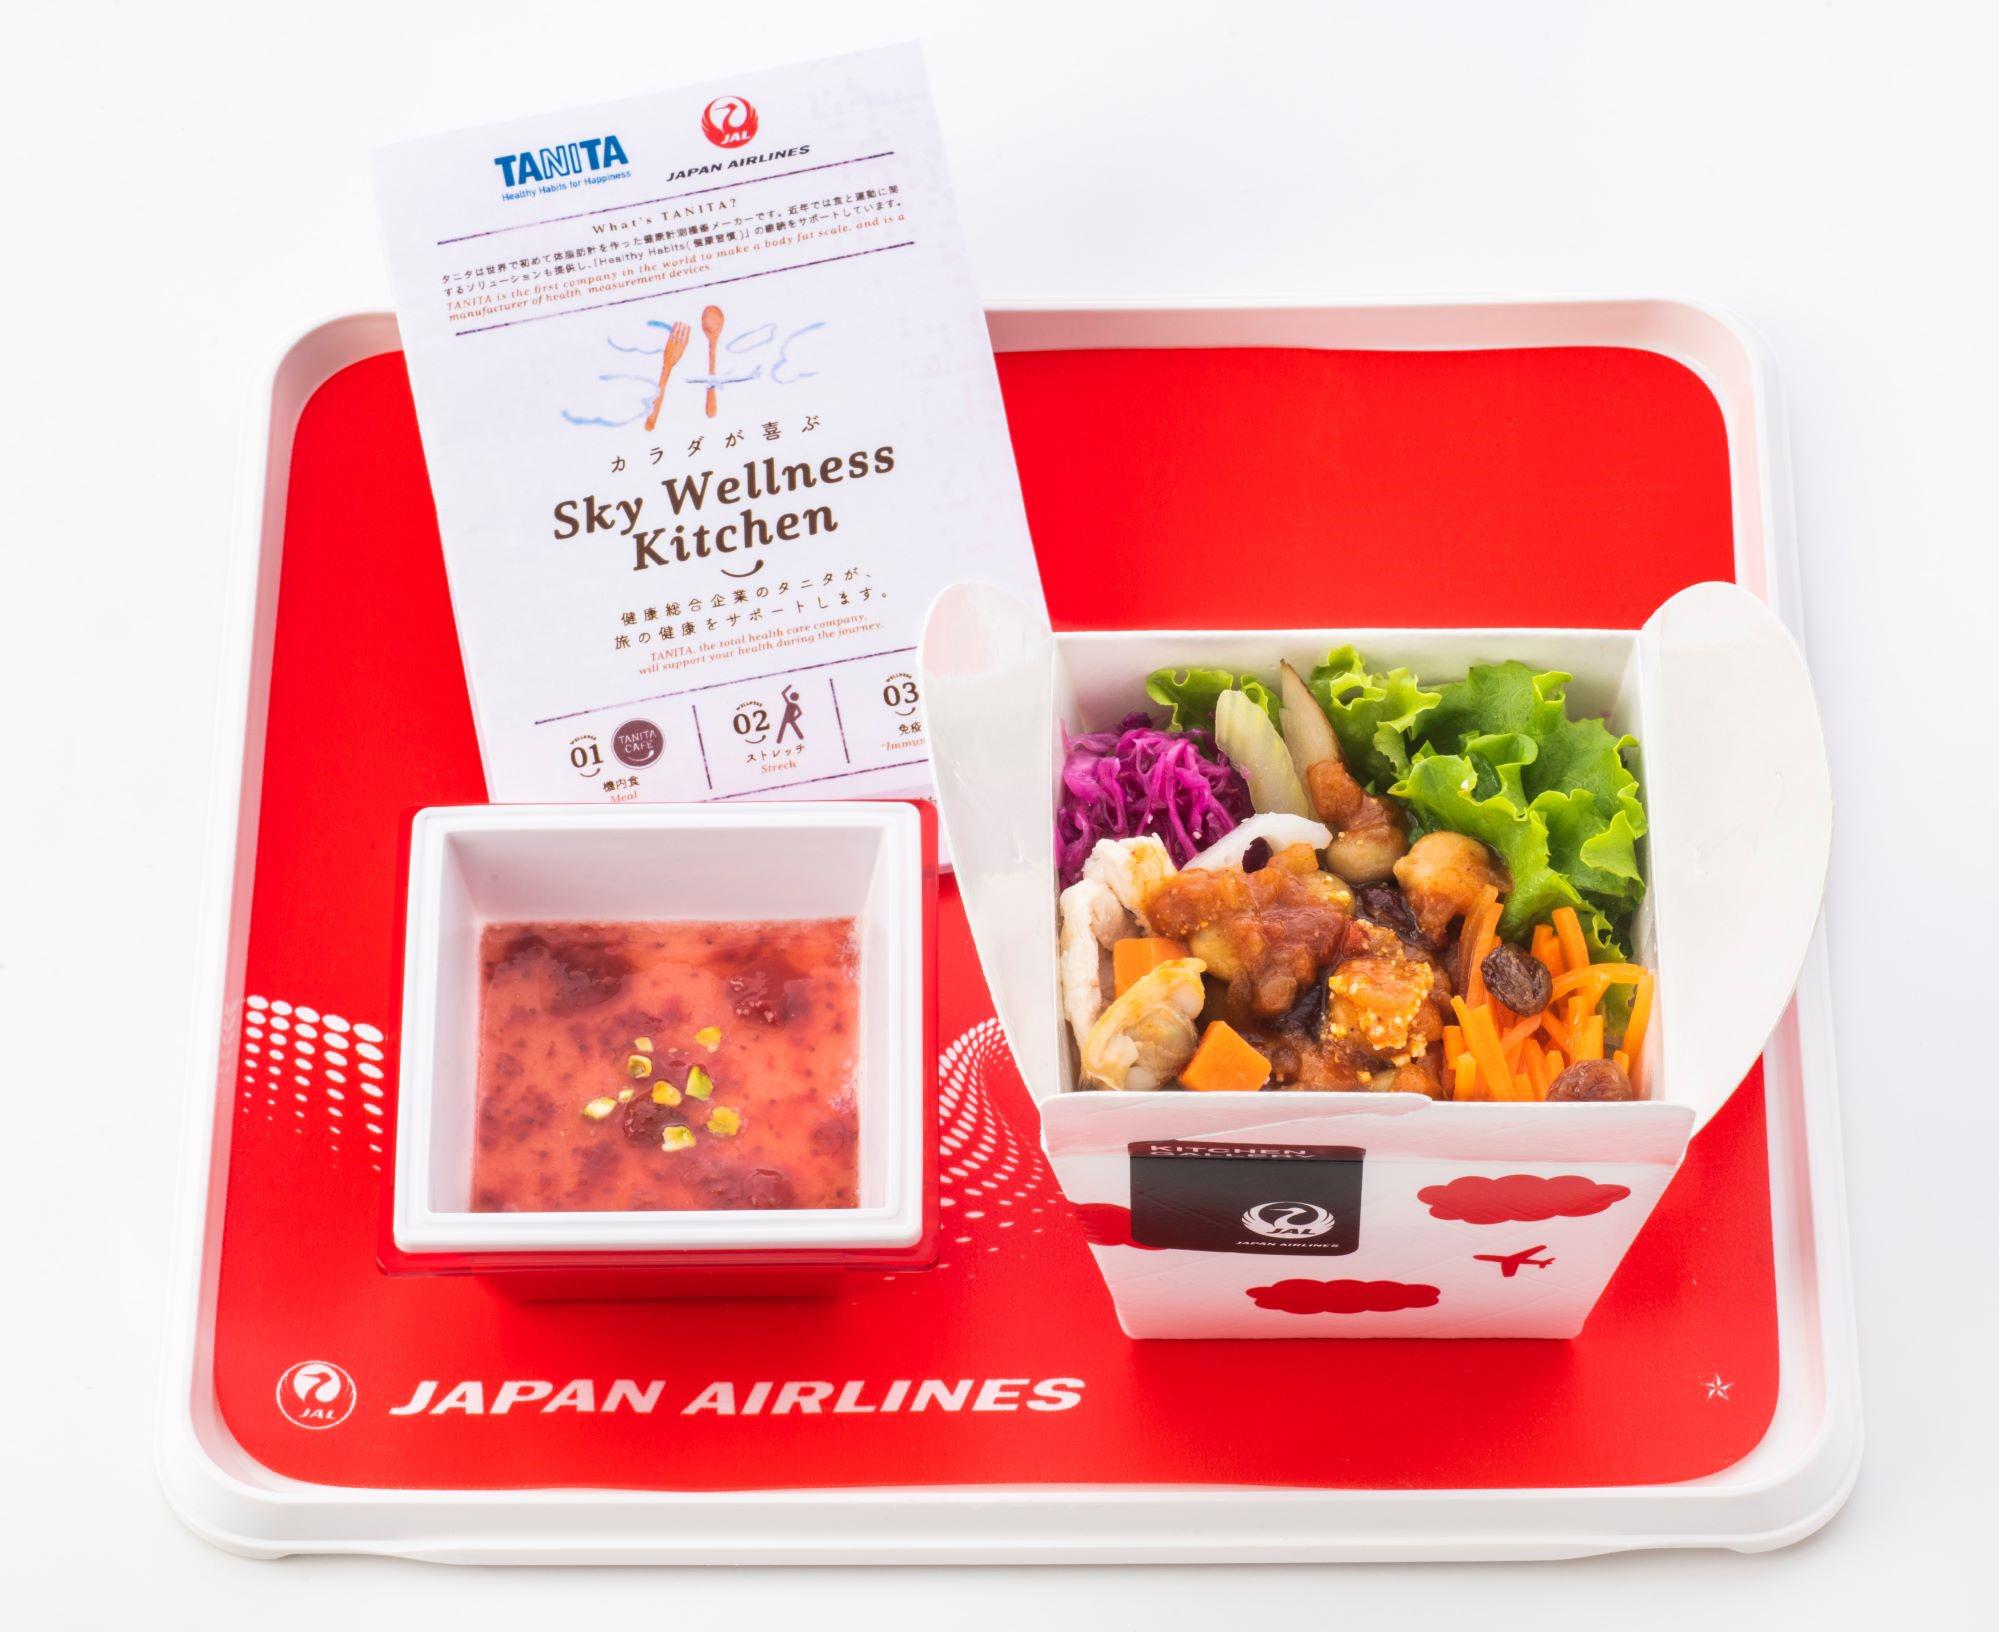 Japan Airlines introduce's 'Sky Wellness Kitchen' with TANITA Cafe